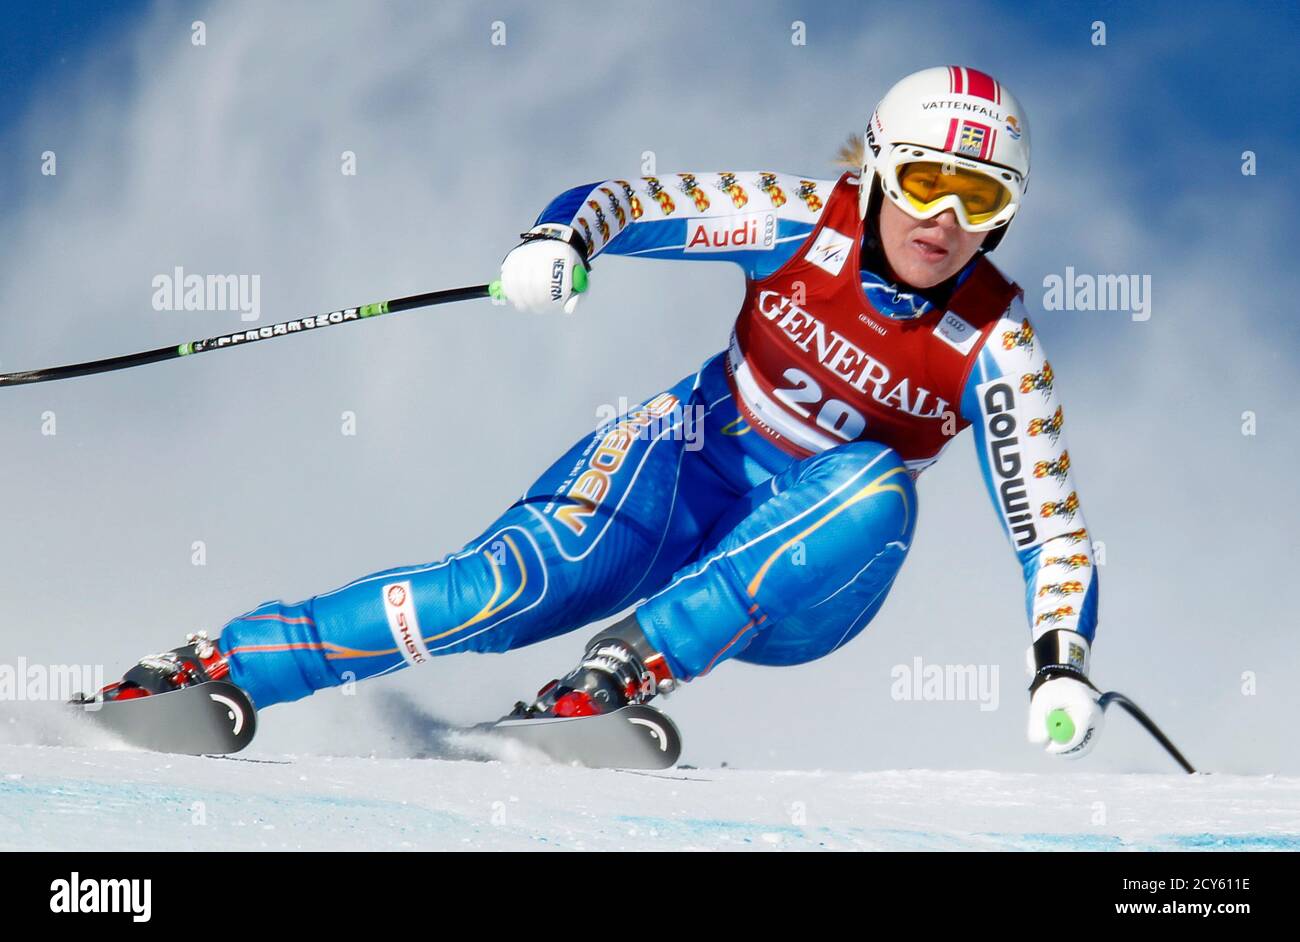 Swedish skier Anja Paerson makes a turn during alpine skiing at the Women's World Cup Downhill  in Lake Louise, Alberta December 4, 2010.  REUTERS/Mike Blake (CANADA - Tags: SPORT SKIING) Stock Photo